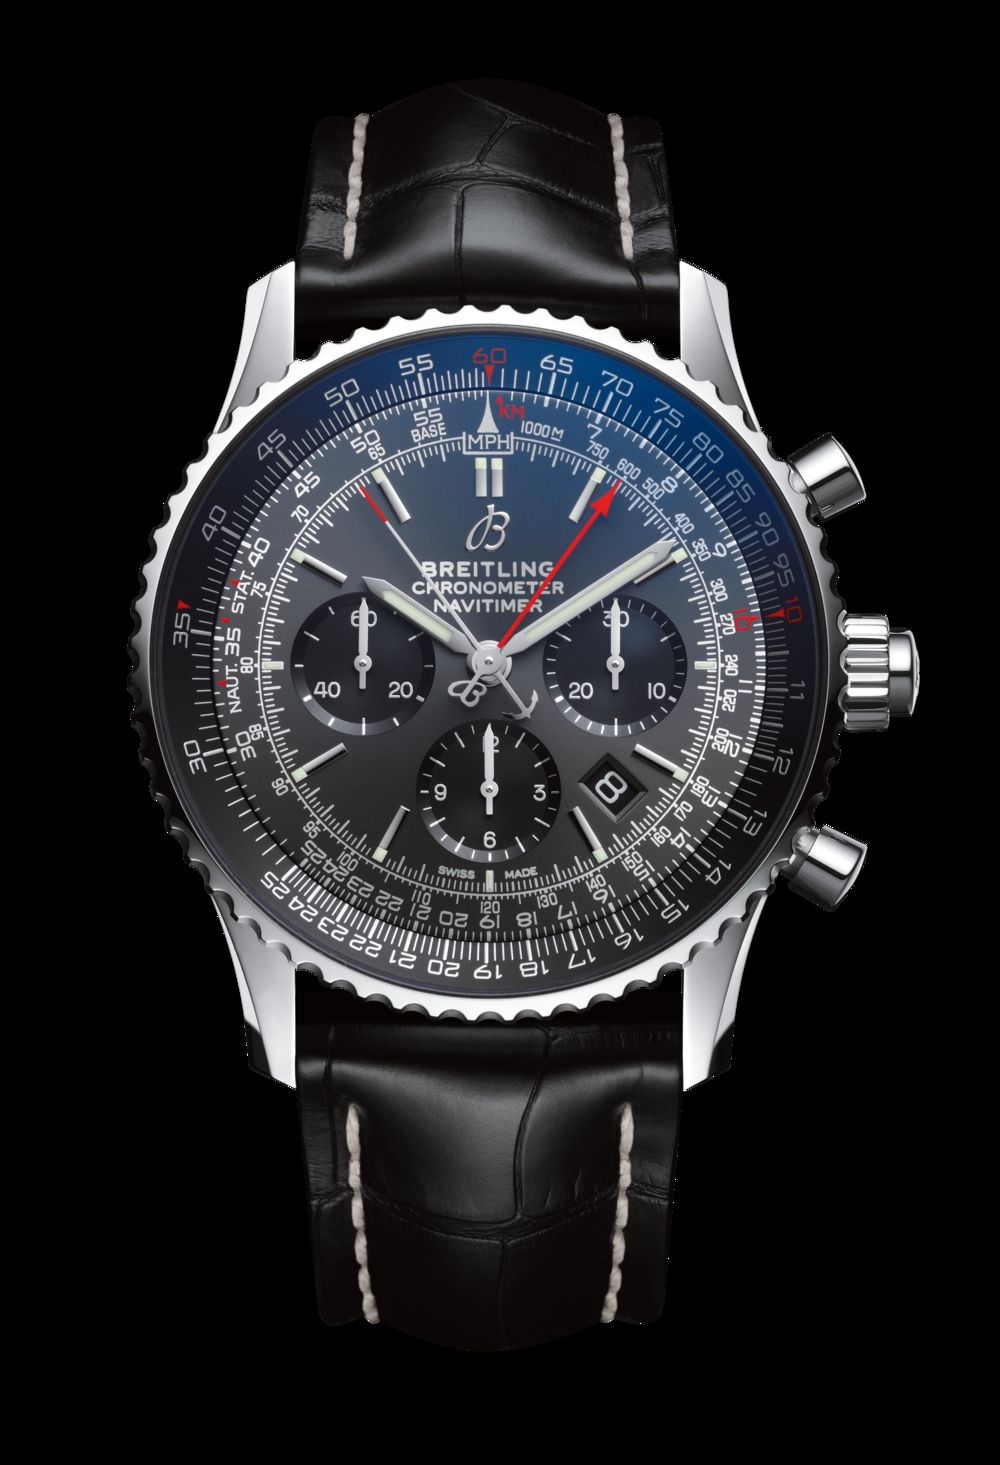 Breitling Navitimer 1 B03 Rattrapante 45 Boutique Edition Watch